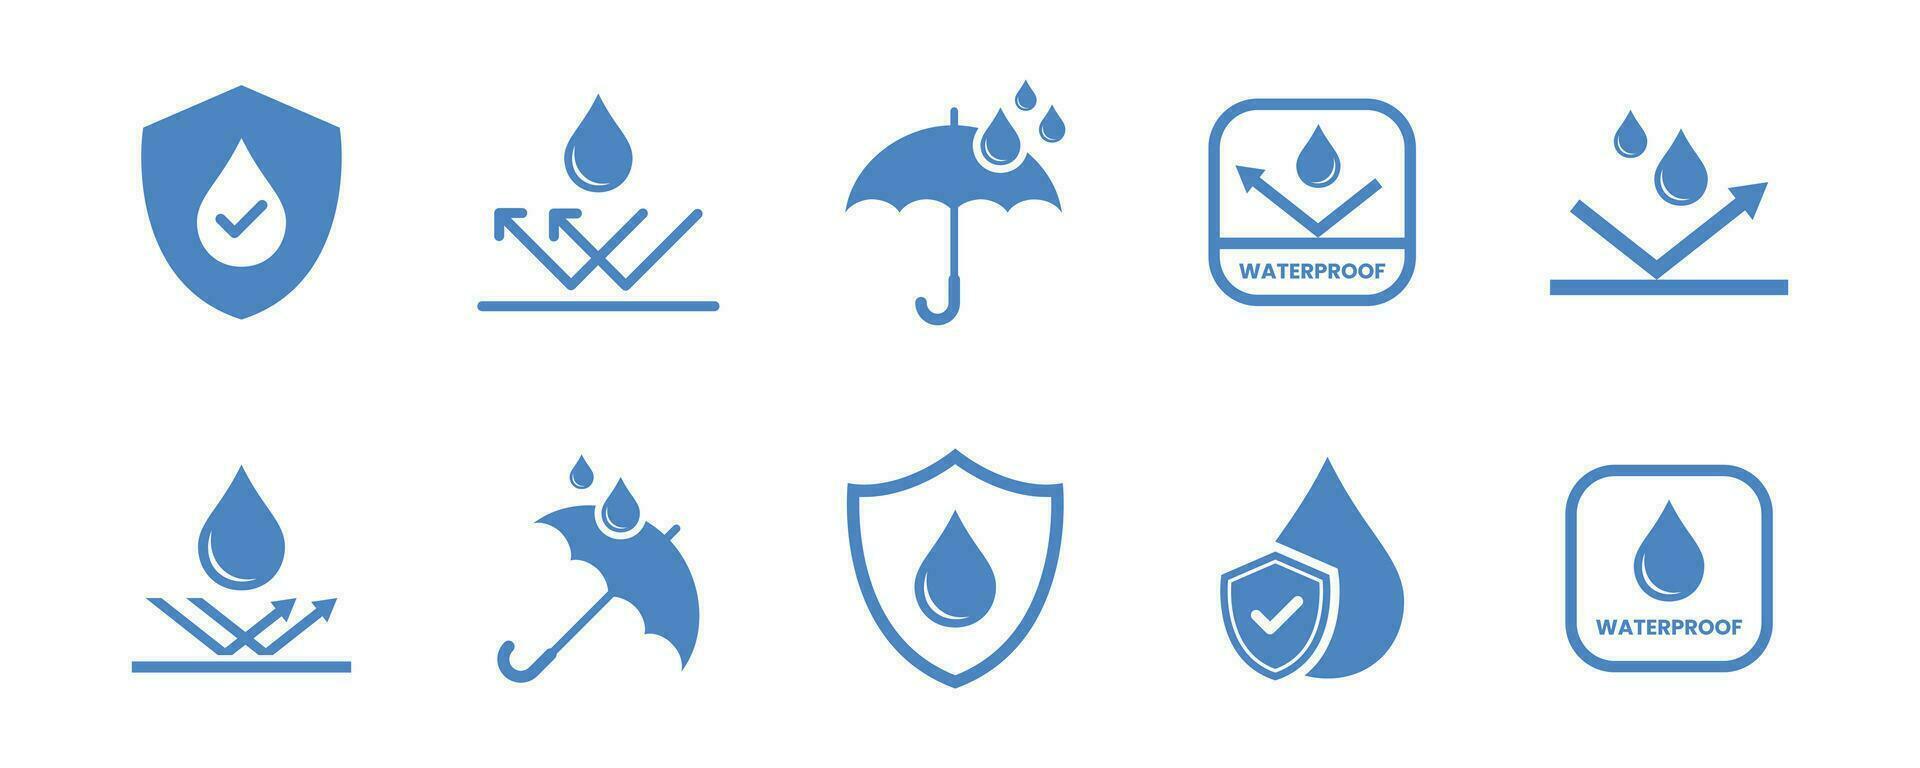 Waterproof icon set. Waterproof sign collection. Water resistant symbol. Water protection icon with a shield. Packaging symbols. Vector illustration.